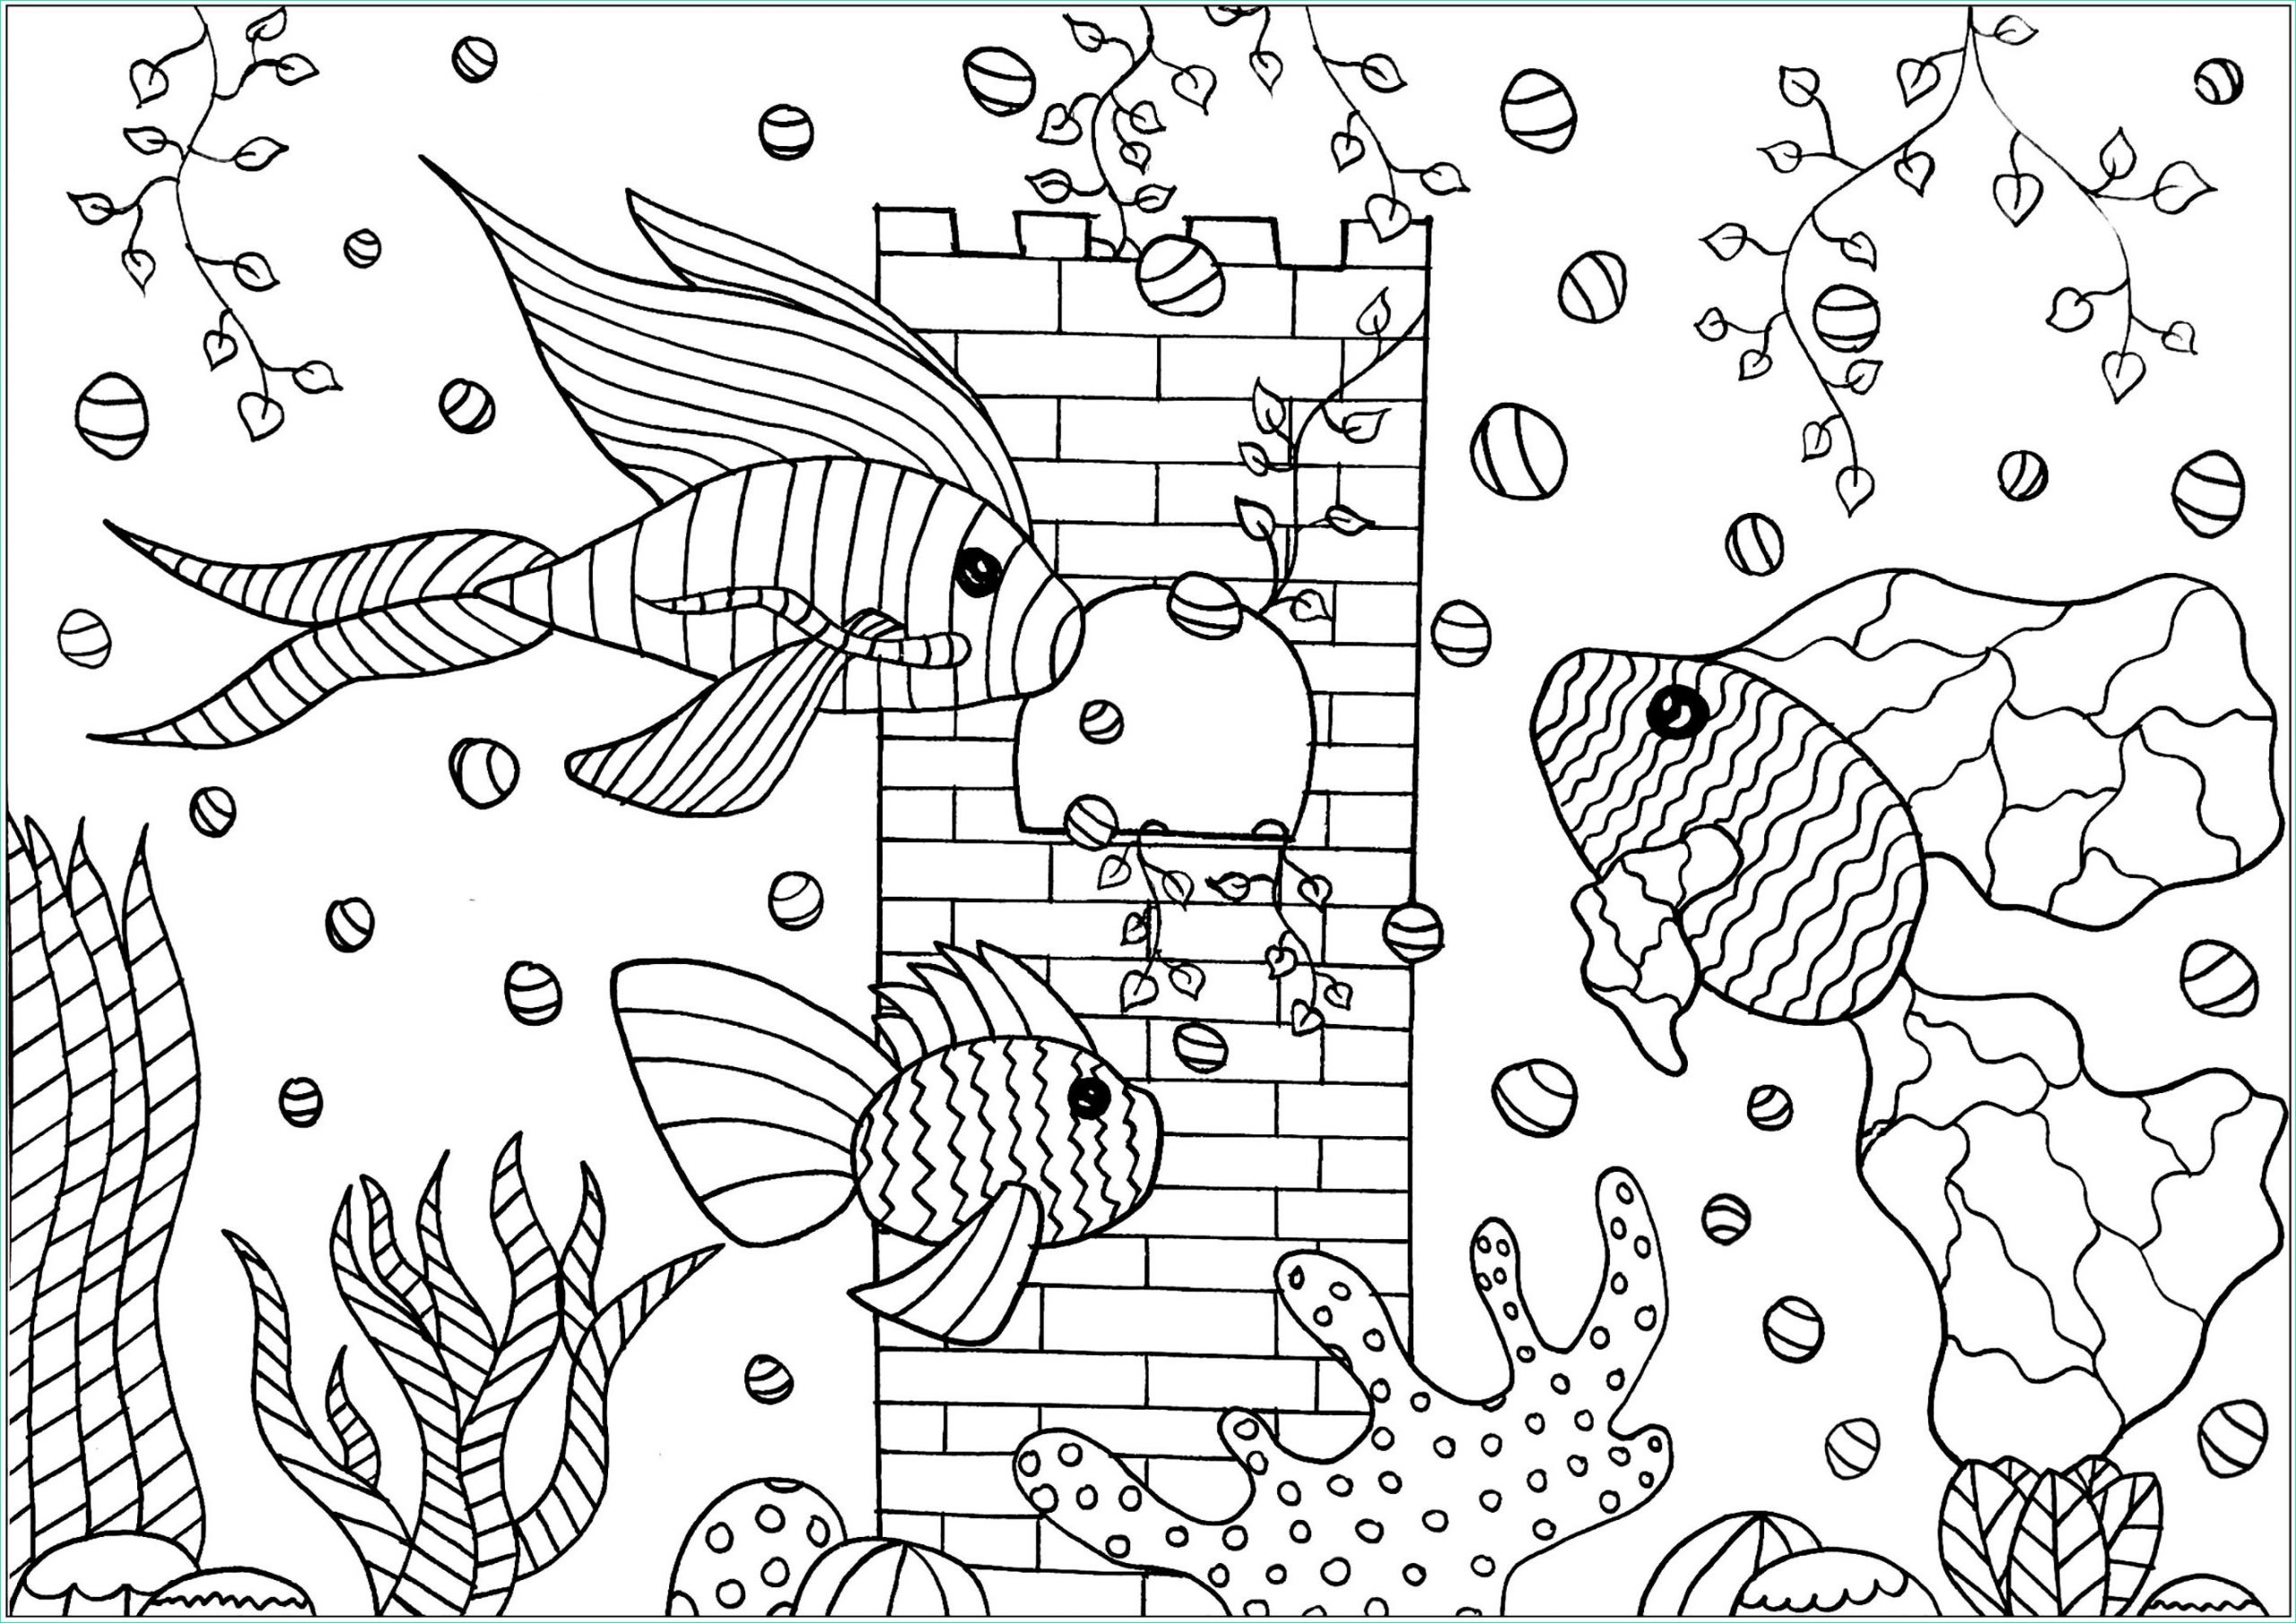 image=fishes coloring tree fishes in an aquarium 1